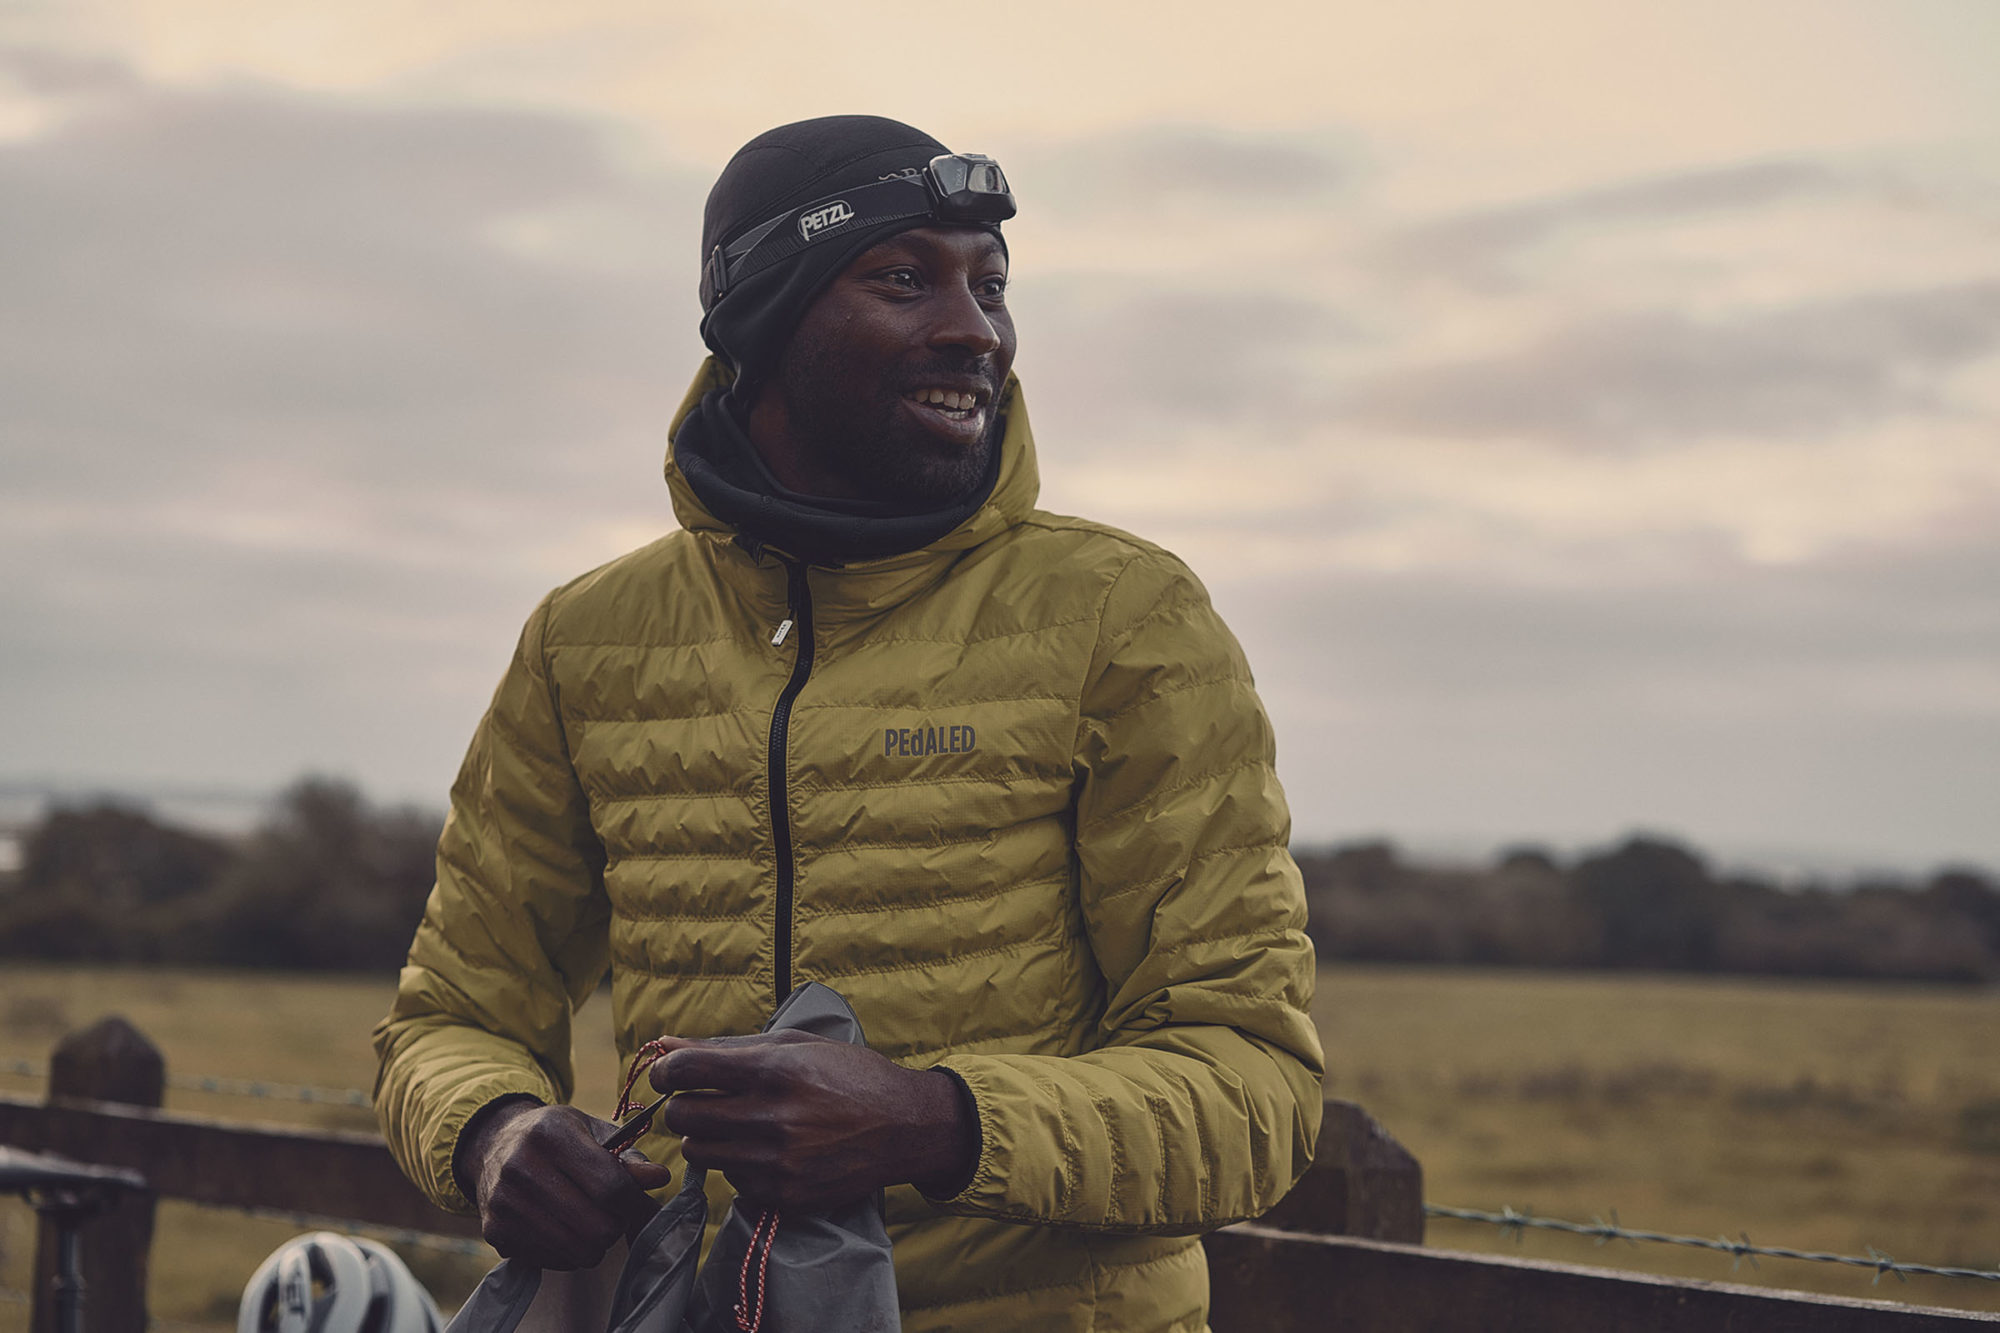 Pedaled Odyssey insulated jacket